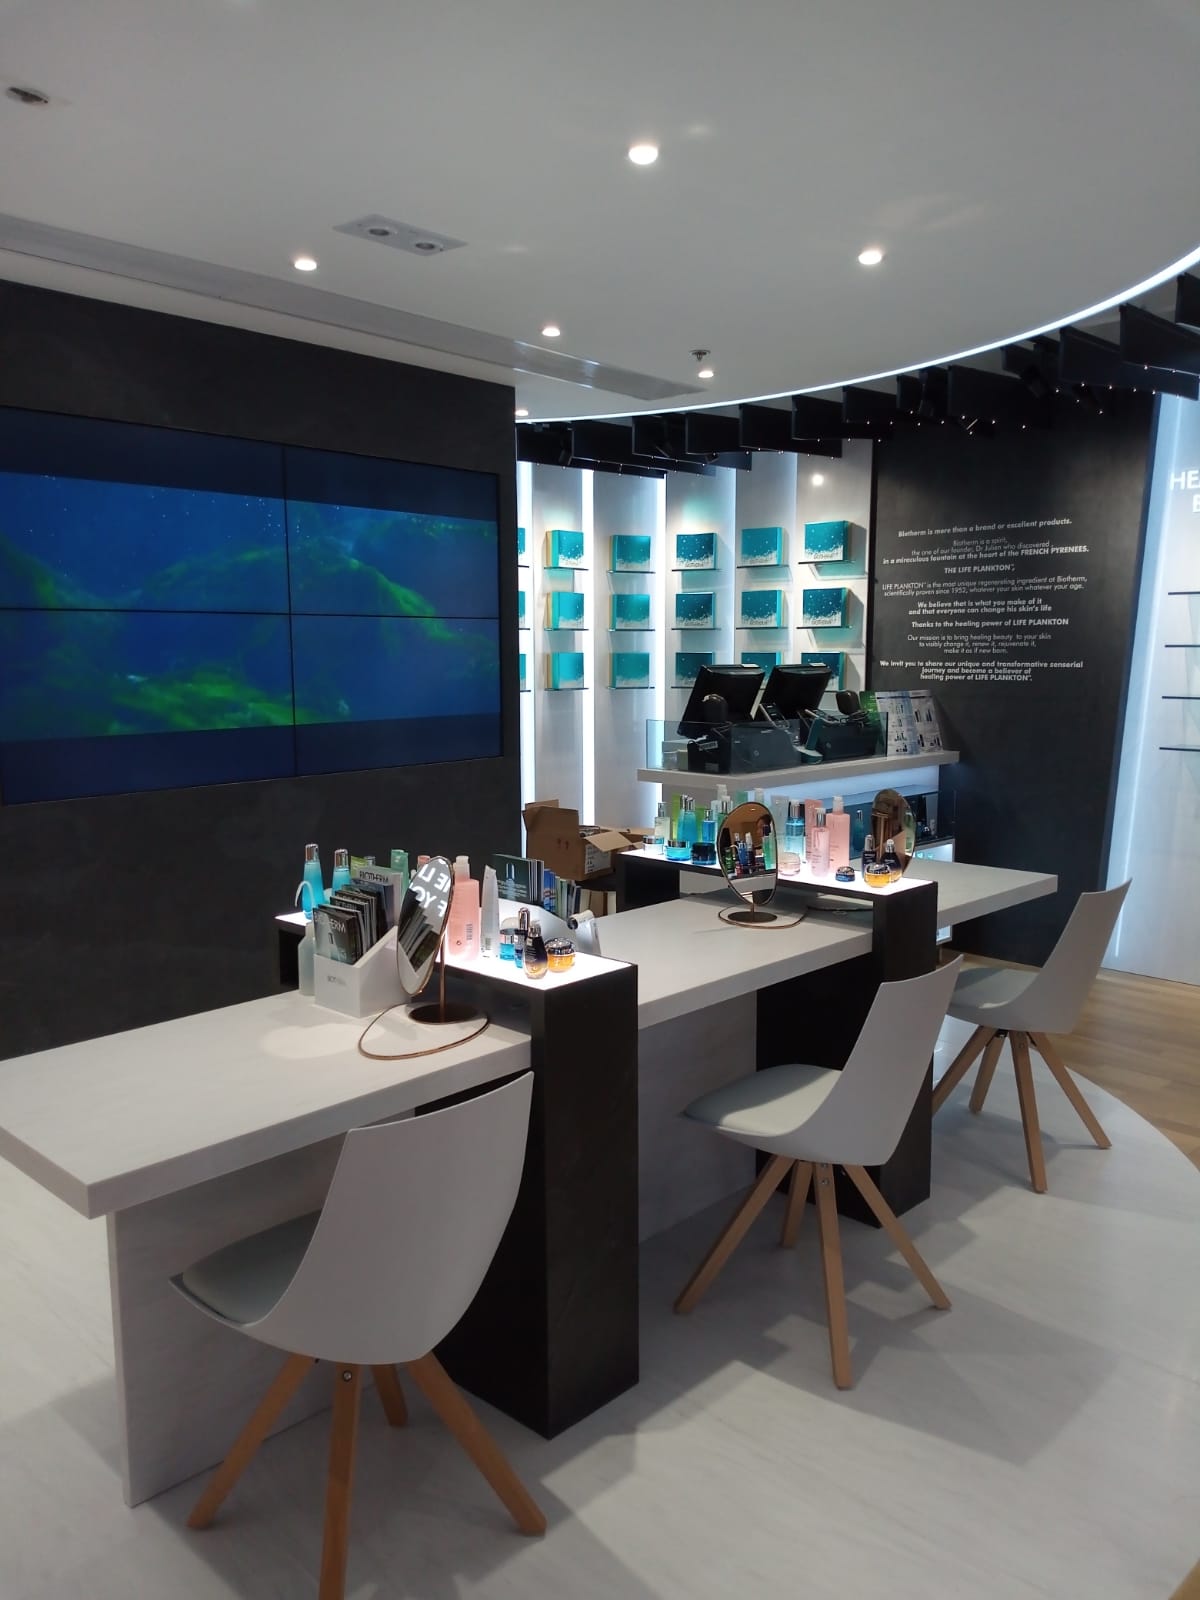 Khristy Yeung - Infinite Design Limited - 連城廣場-BIOTHERM